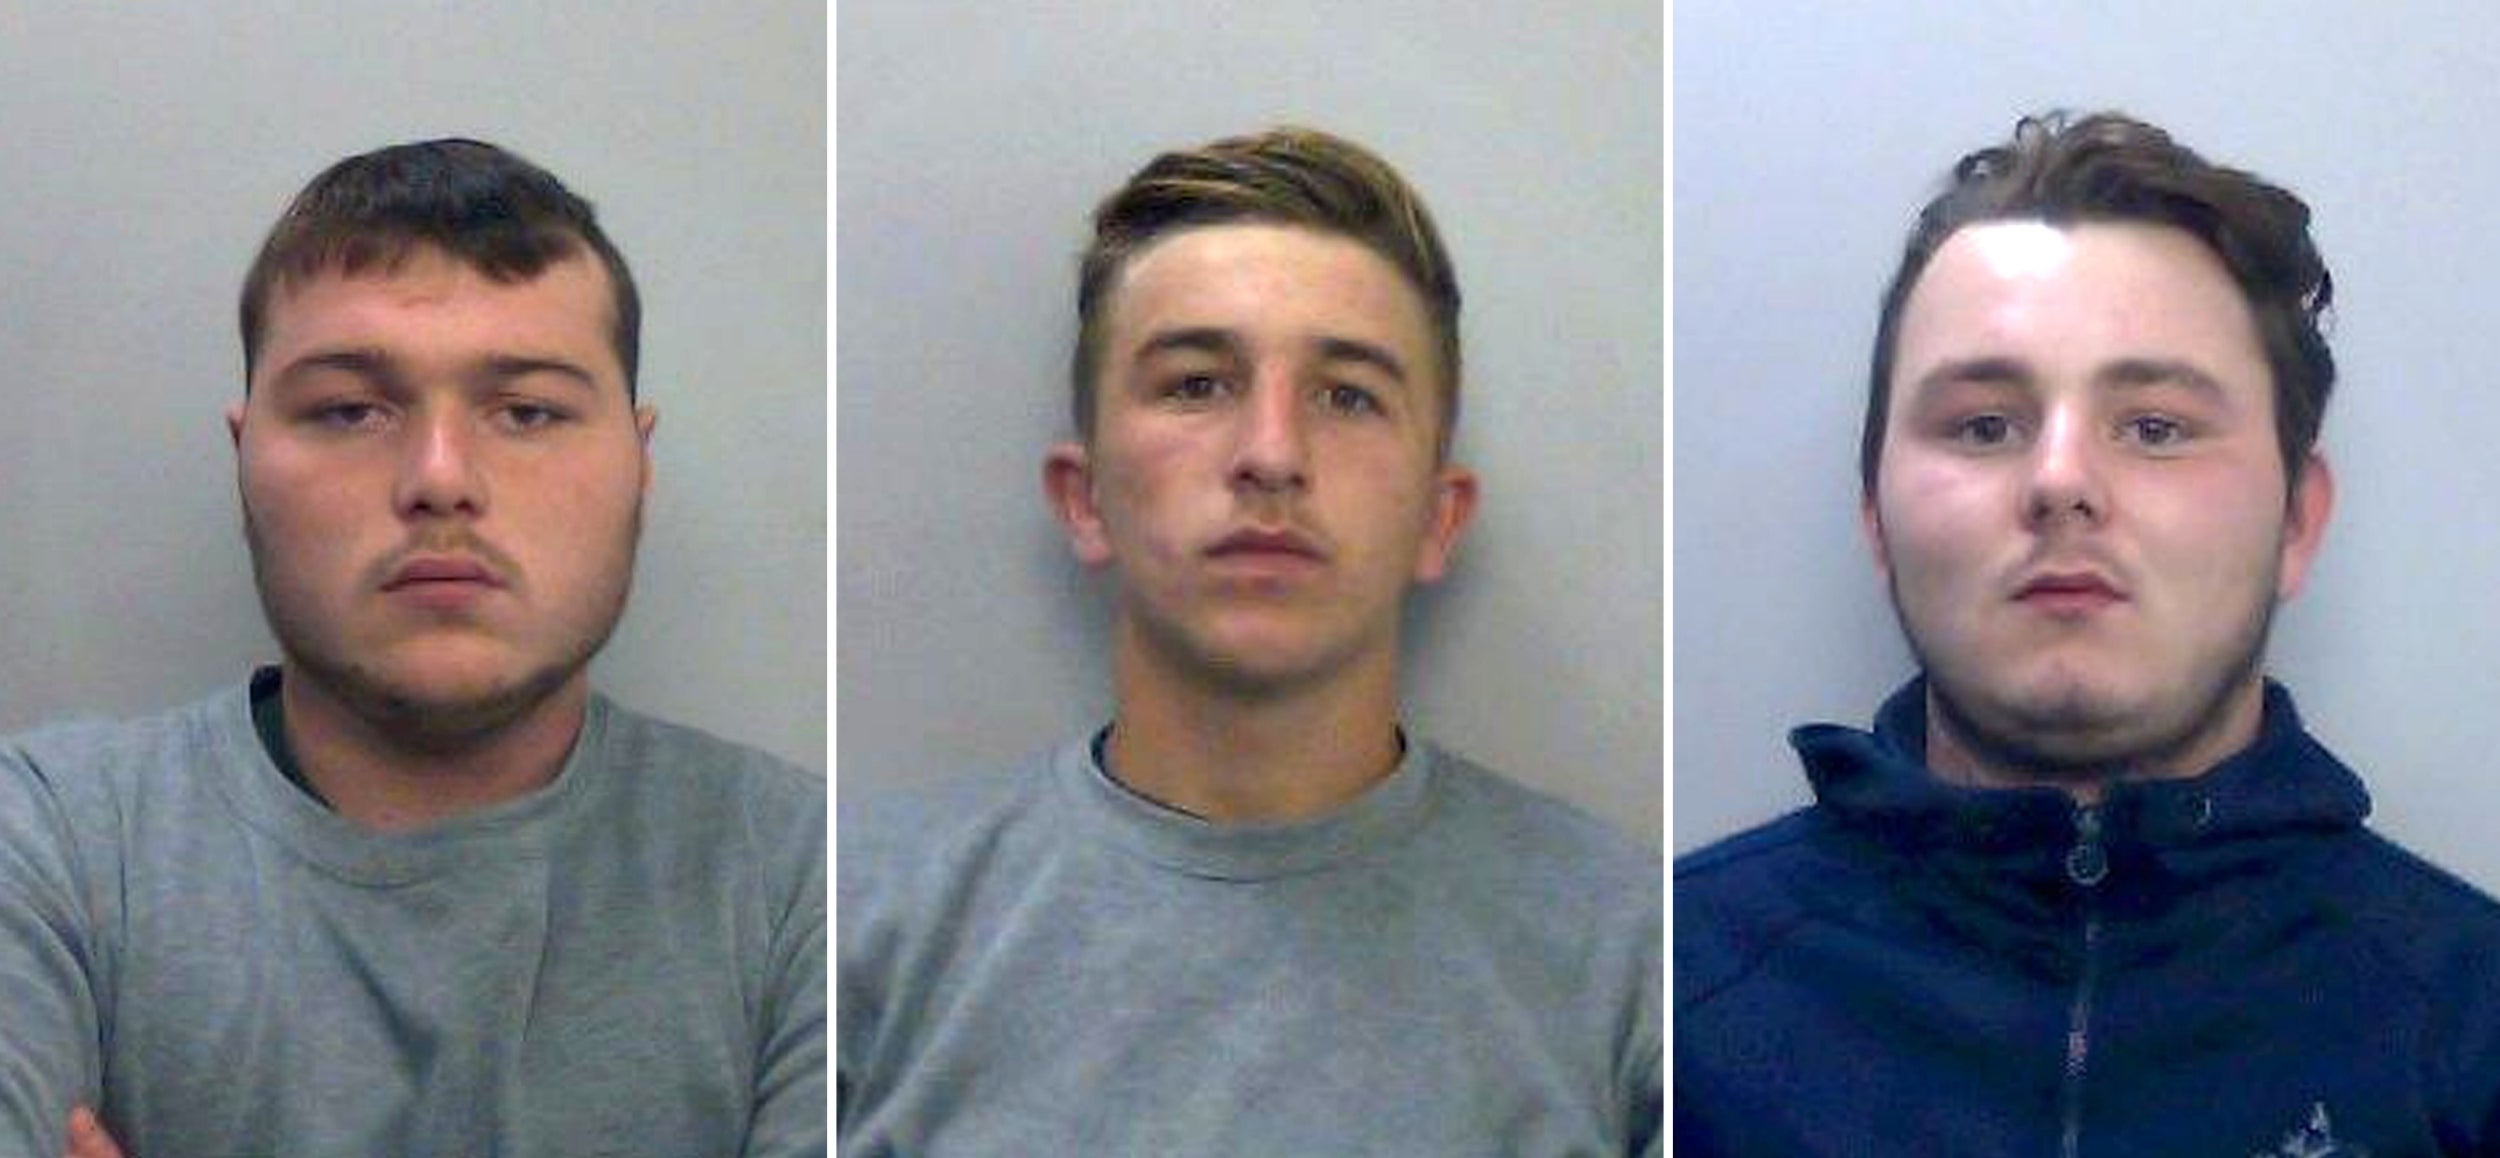 Driver Henry Long, 19, and passengers Jessie Cole and Albert Bowers, both 18, were convicted of the manslaughter of PC Andrew Harper.